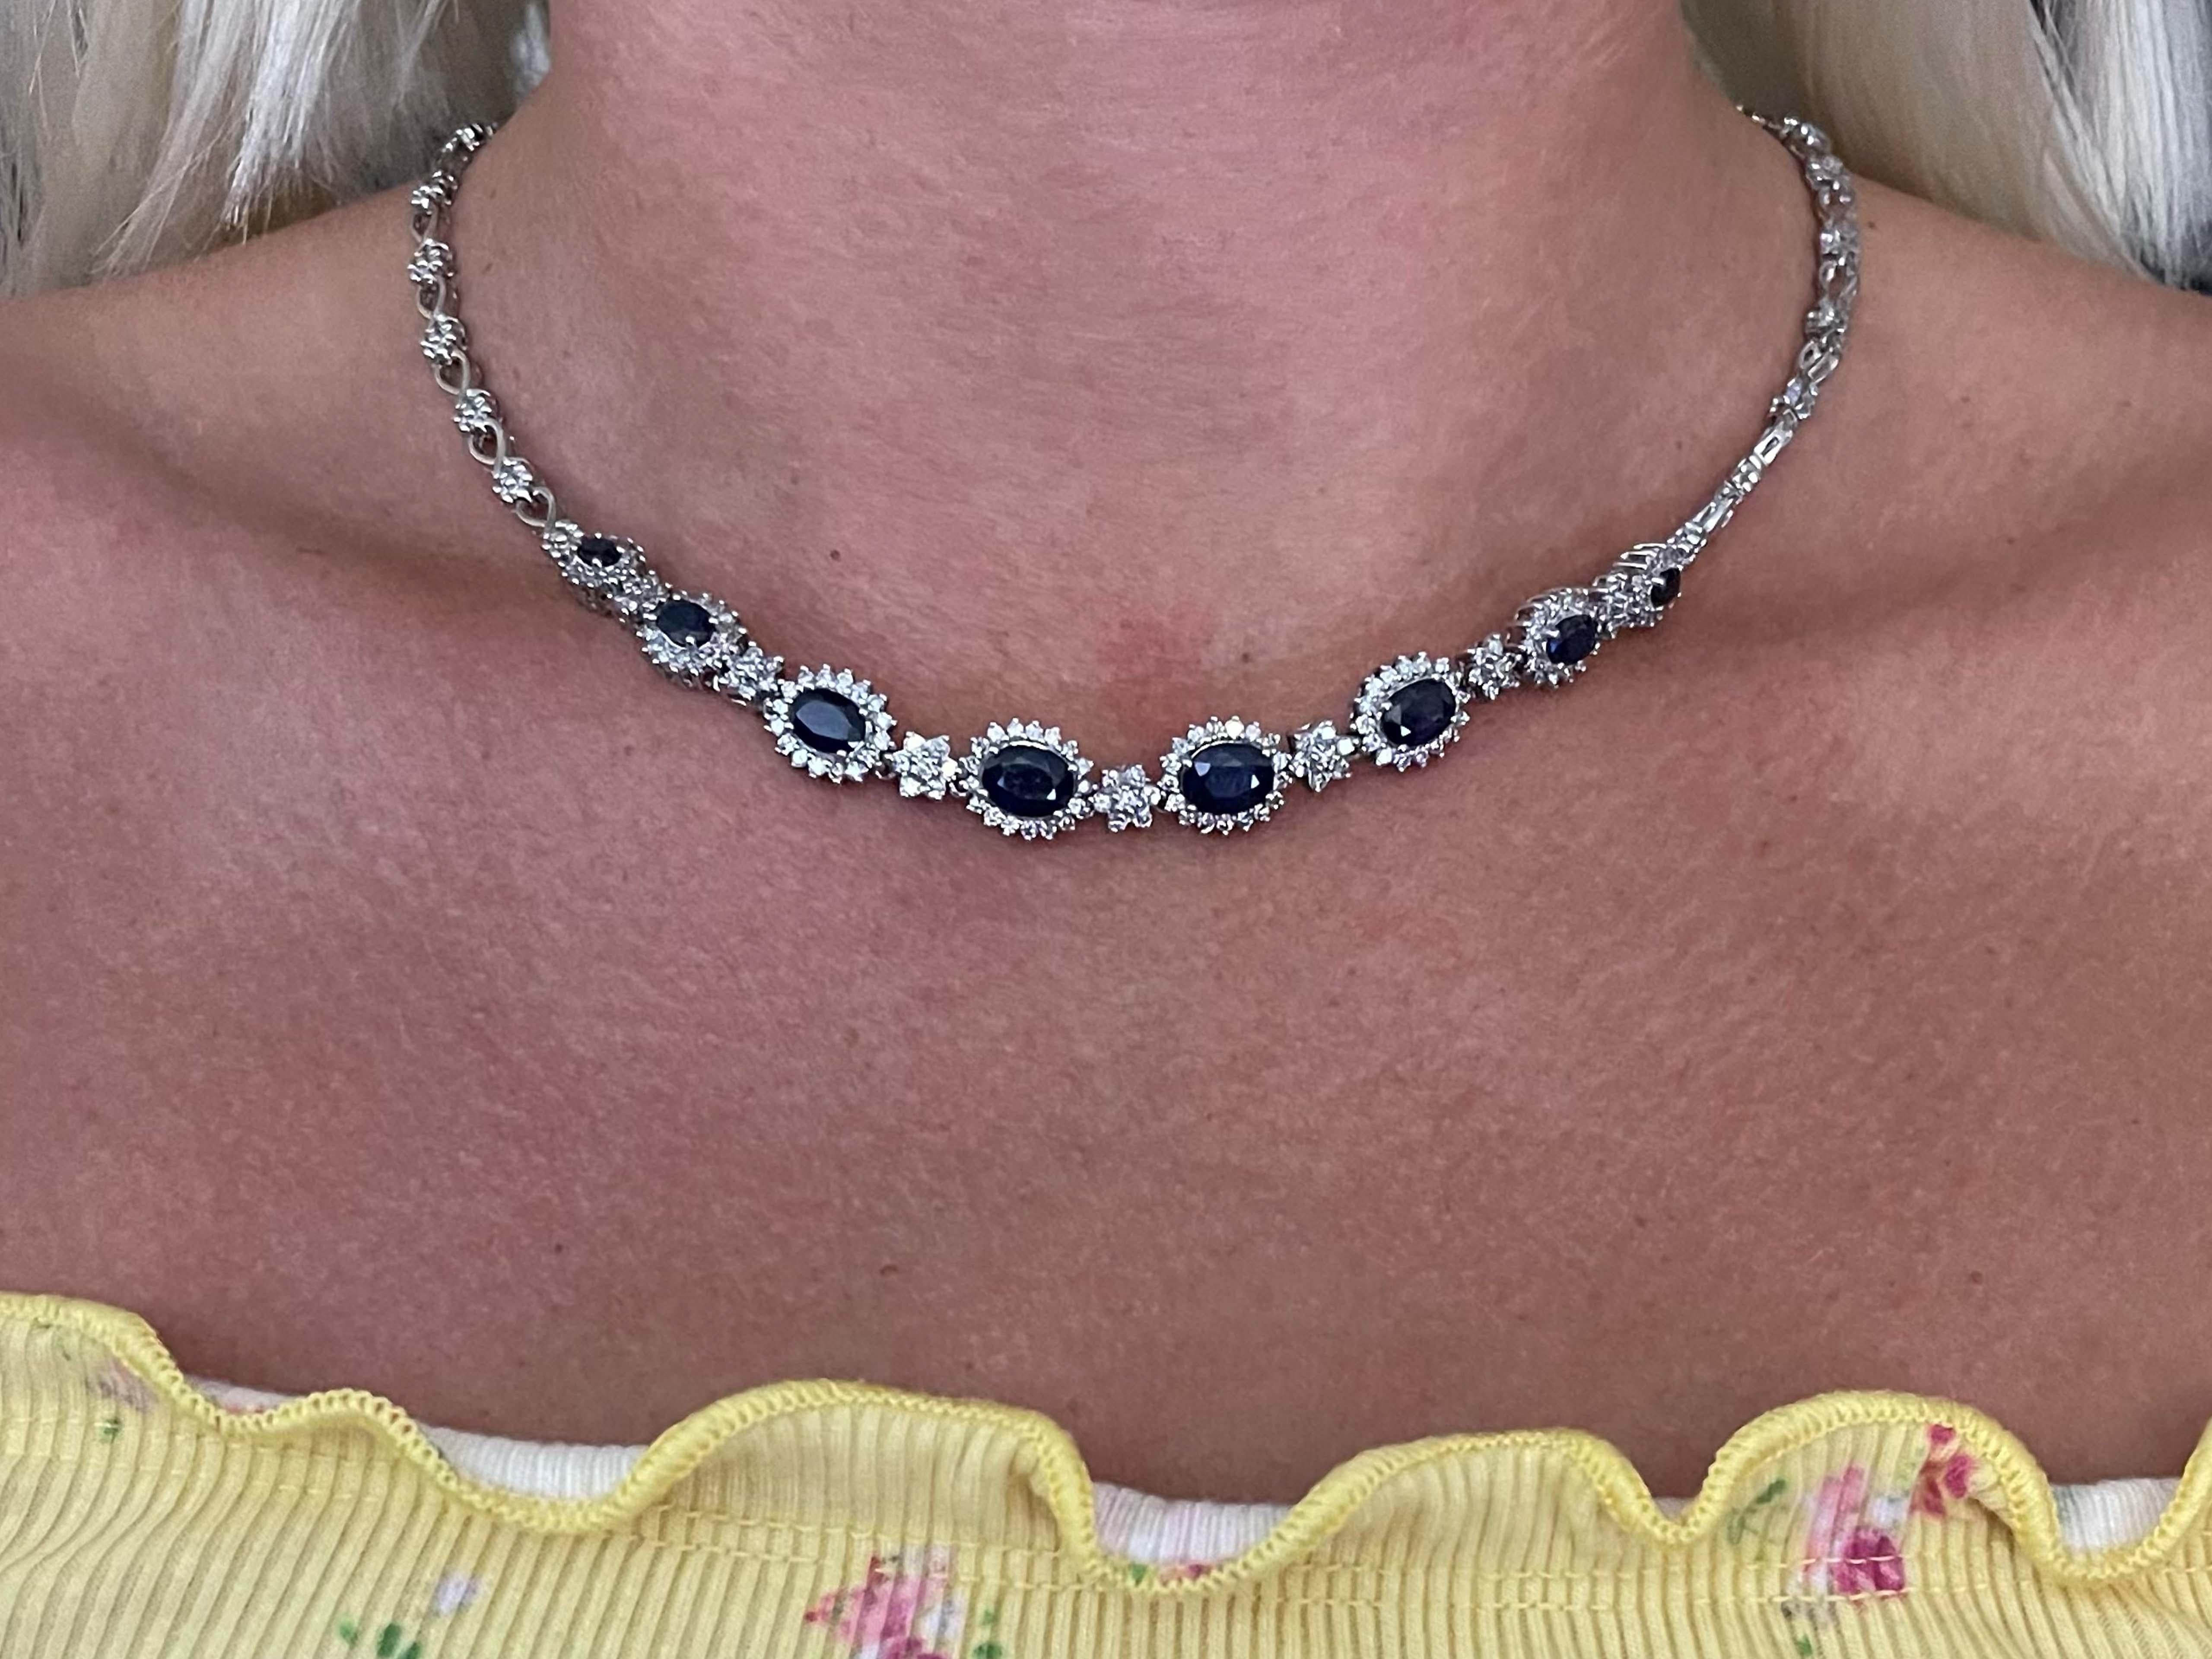 This stunning blue sapphire and diamond necklace is sure to turn heads. Made with 8 oval sapphires surrounded by diamond halos, the sapphires weigh 6.32 carats. Altogether the necklace has 167 diamonds. The diamonds are G-H, SI and weigh 1.08